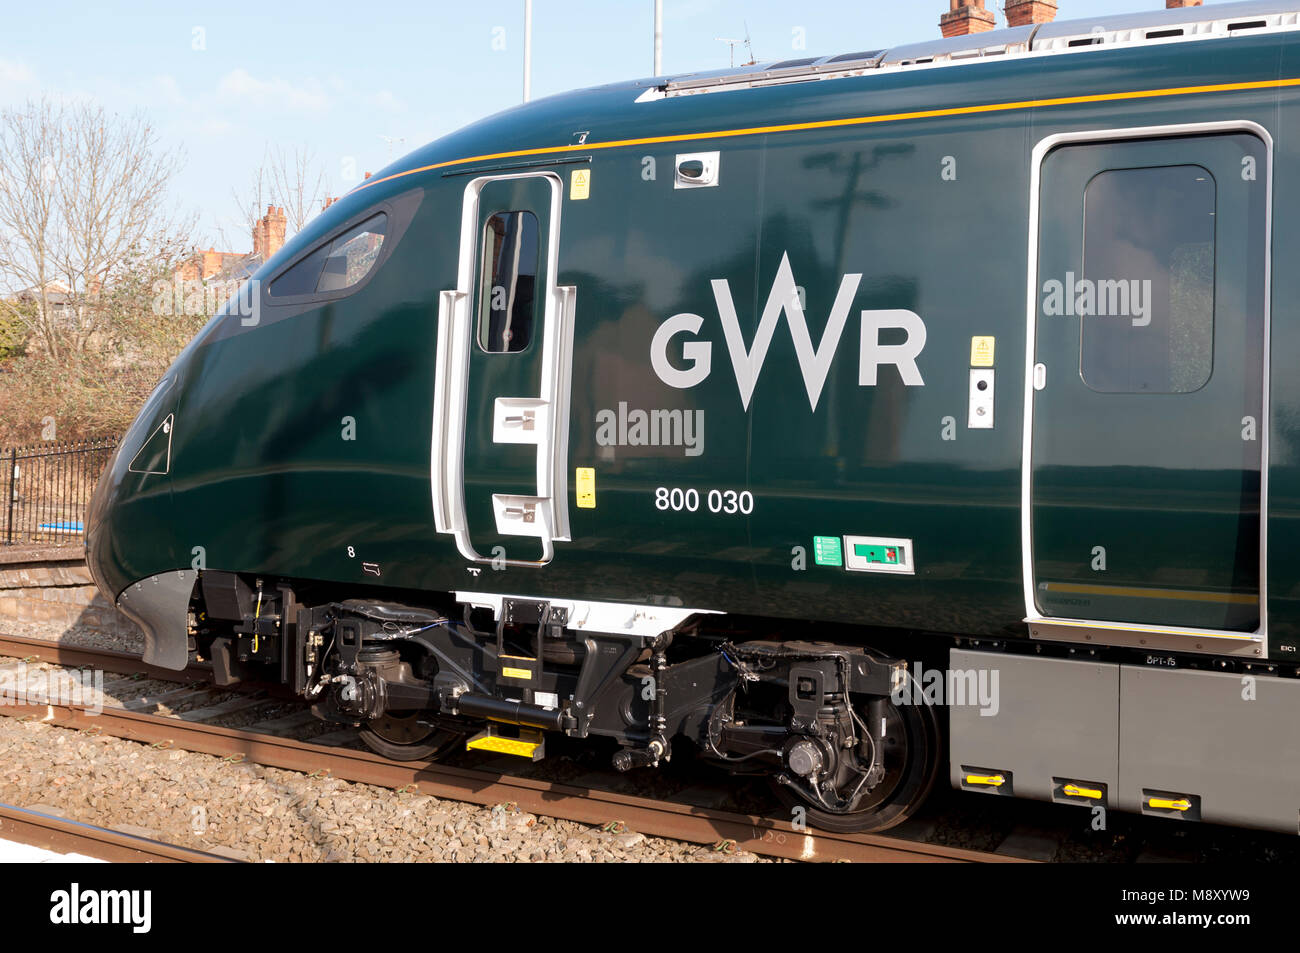 Great Western Railway classe 800 a IET Evesham station, Worcestershire, Regno Unito Foto Stock